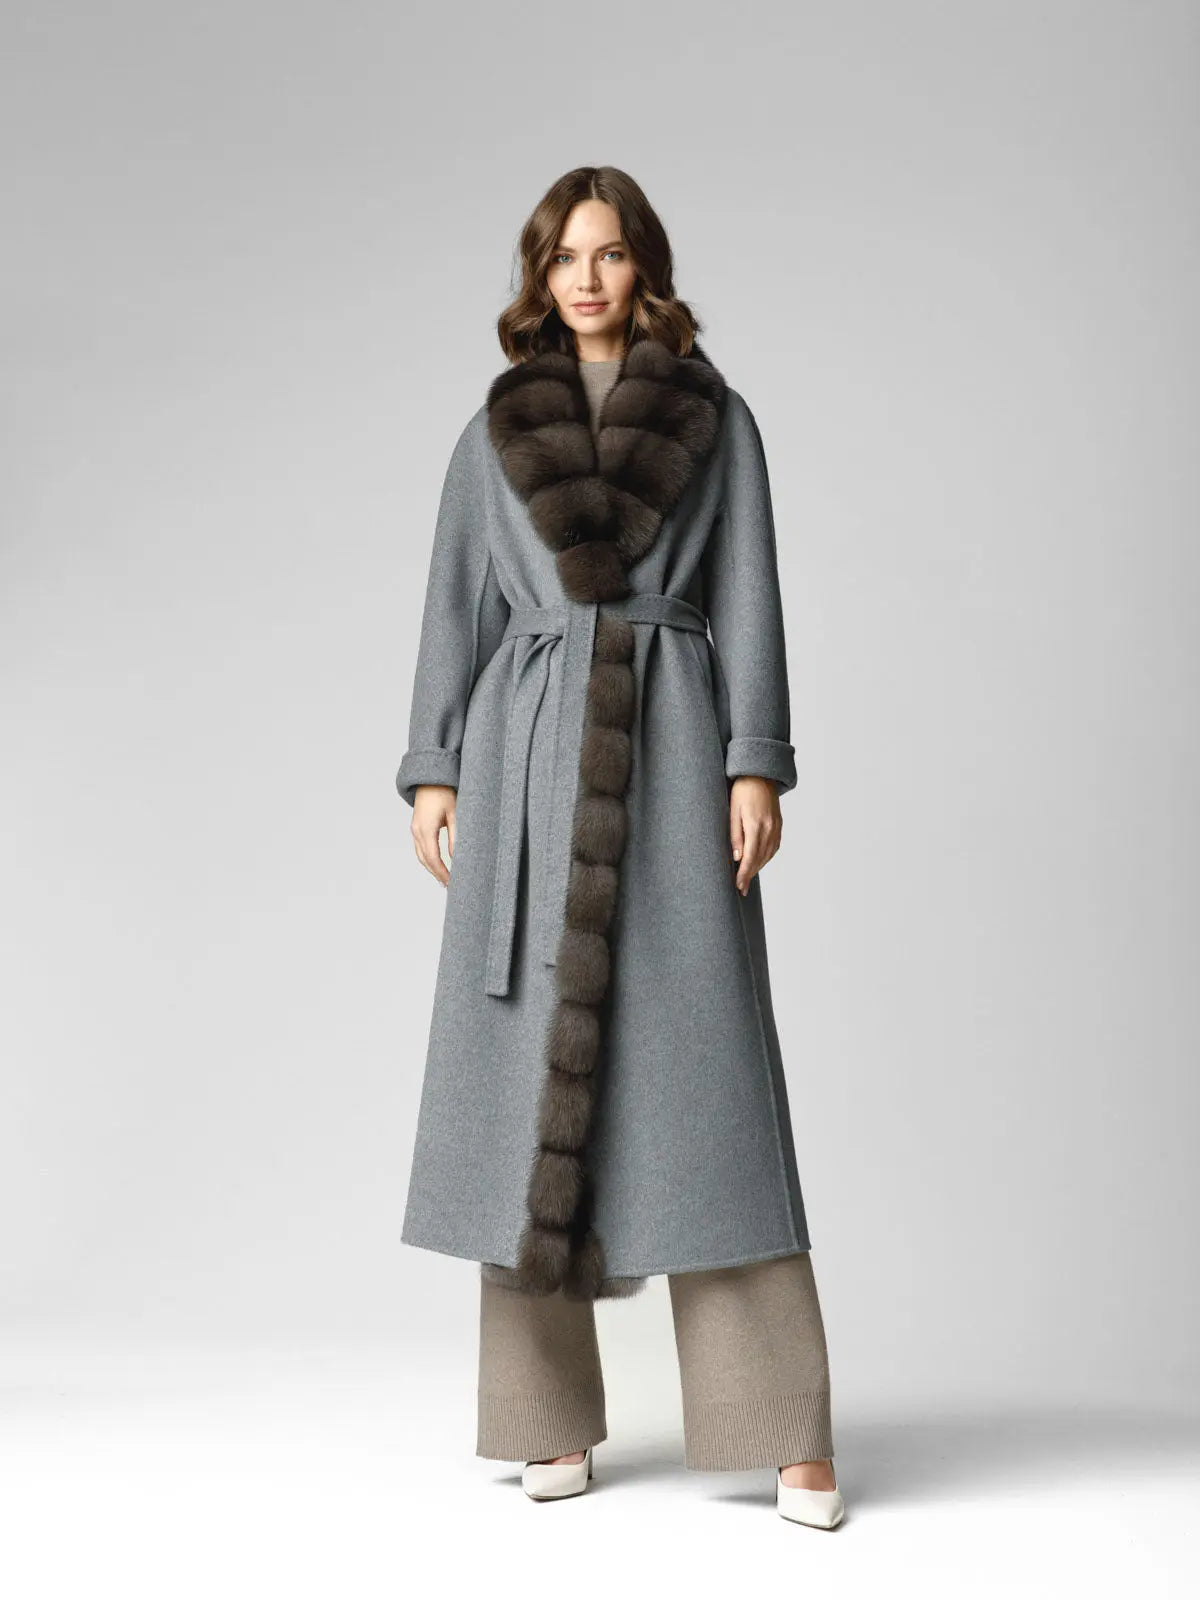 Cashmere coat with sable trim on the sides in graphite tone